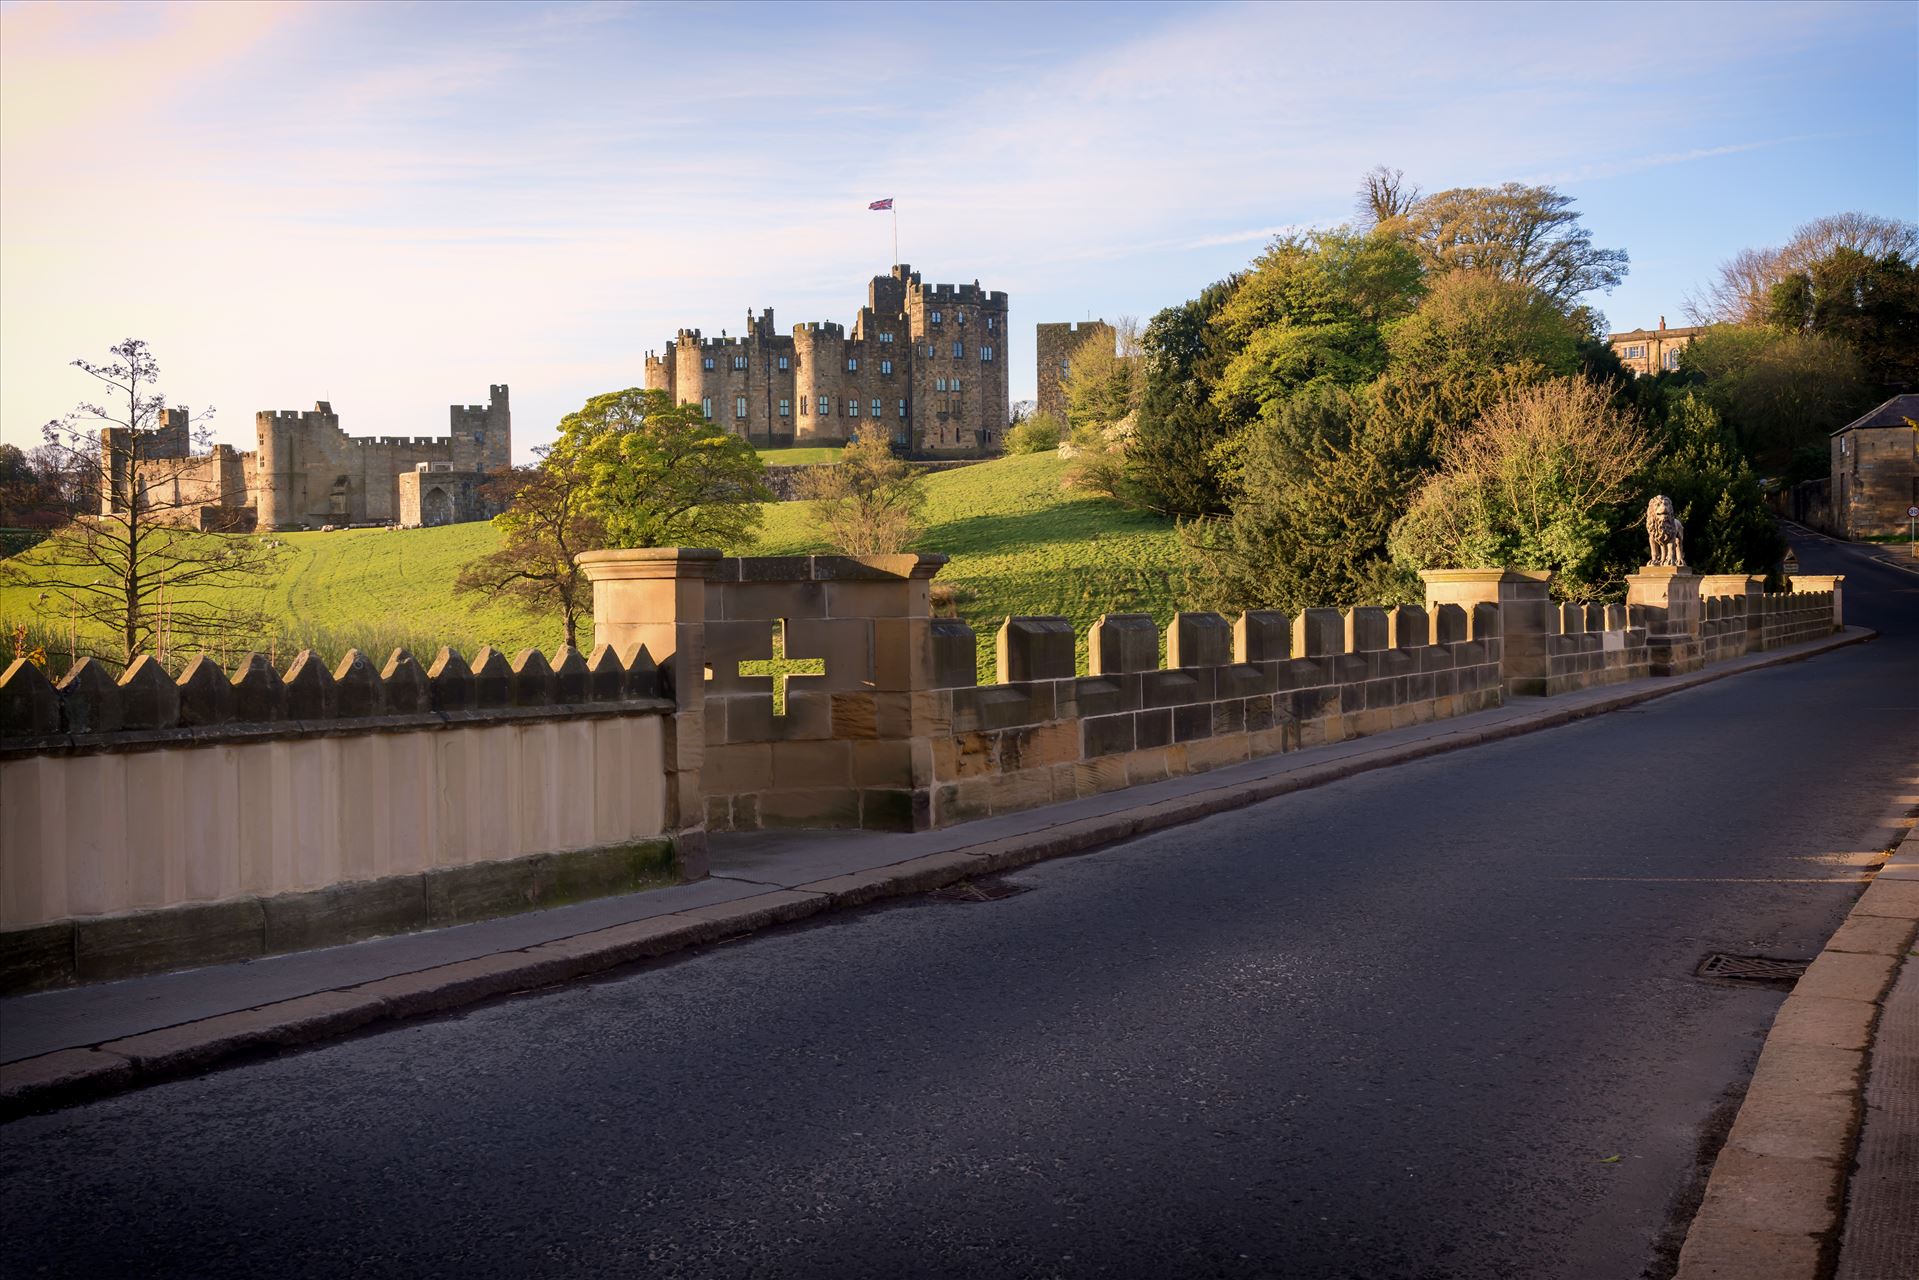 Alnwick Castle, Northumberland - The castle sits on the River Aln in the rural town of Alnwick & has been the setting for a number of movies, possibly the most remembered is Harry Potter. The castle is occupied by the current Duke of Northumberland & his family. by philreay